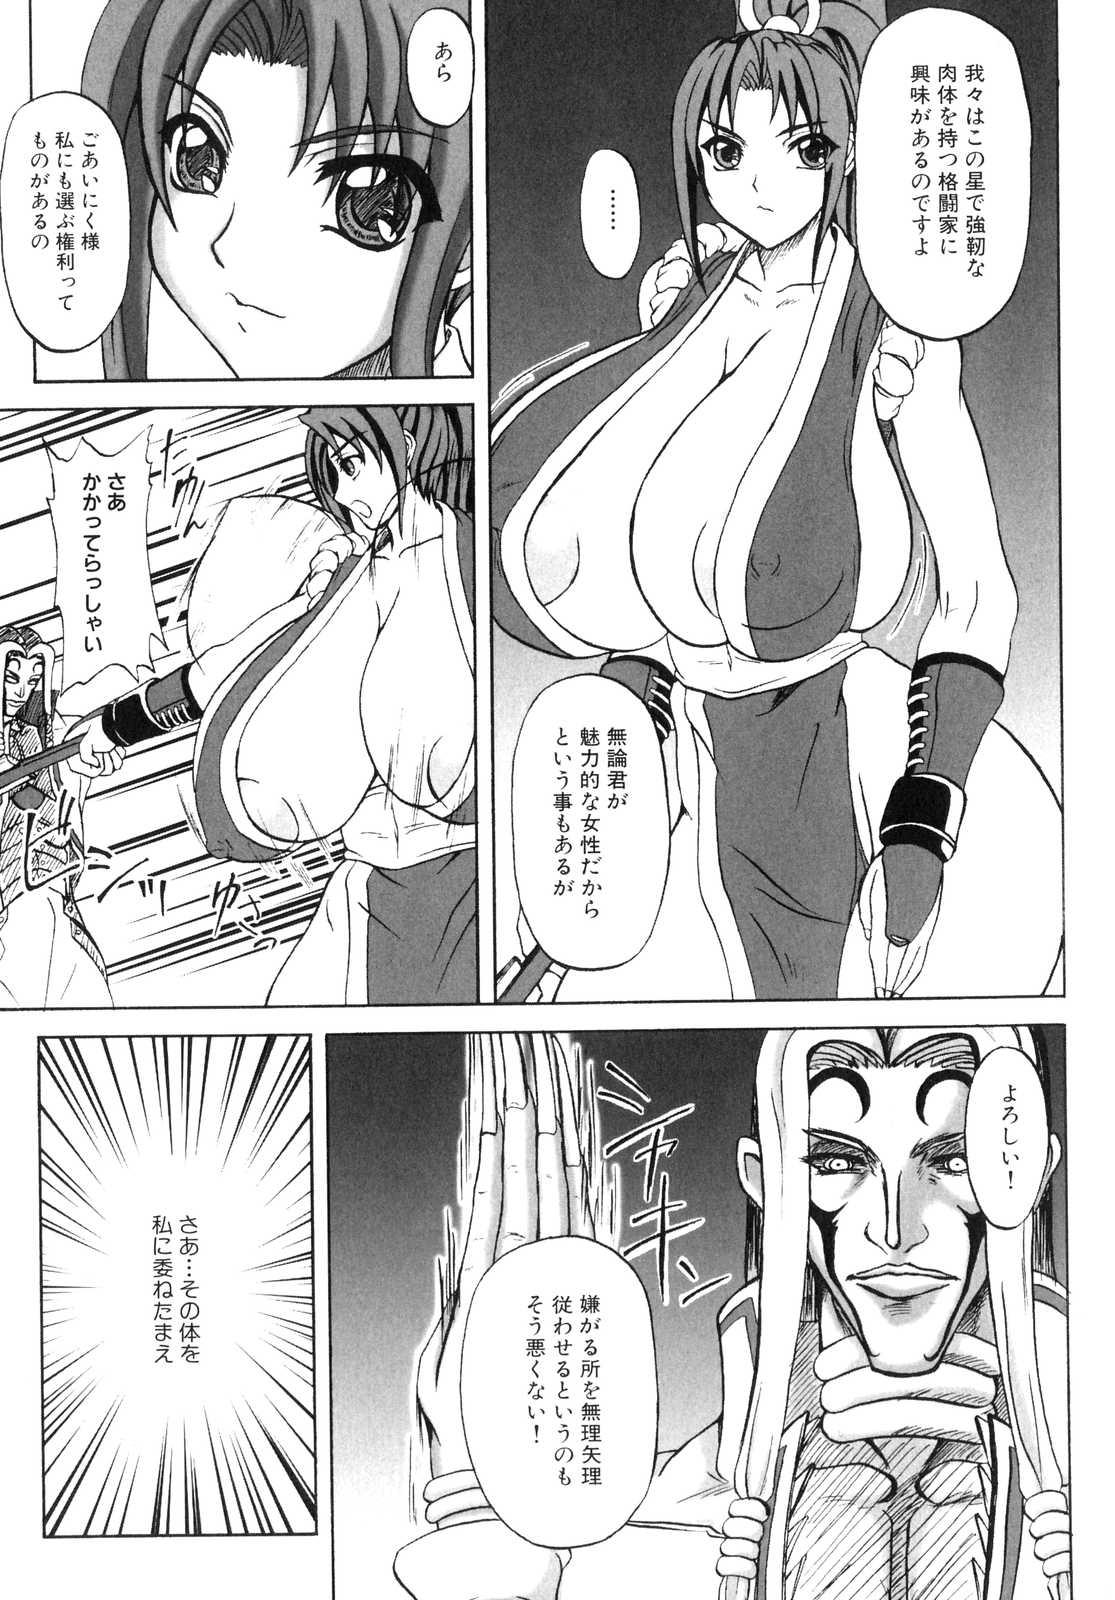 Soles Mars Impact - King of fighters Gays - Page 4